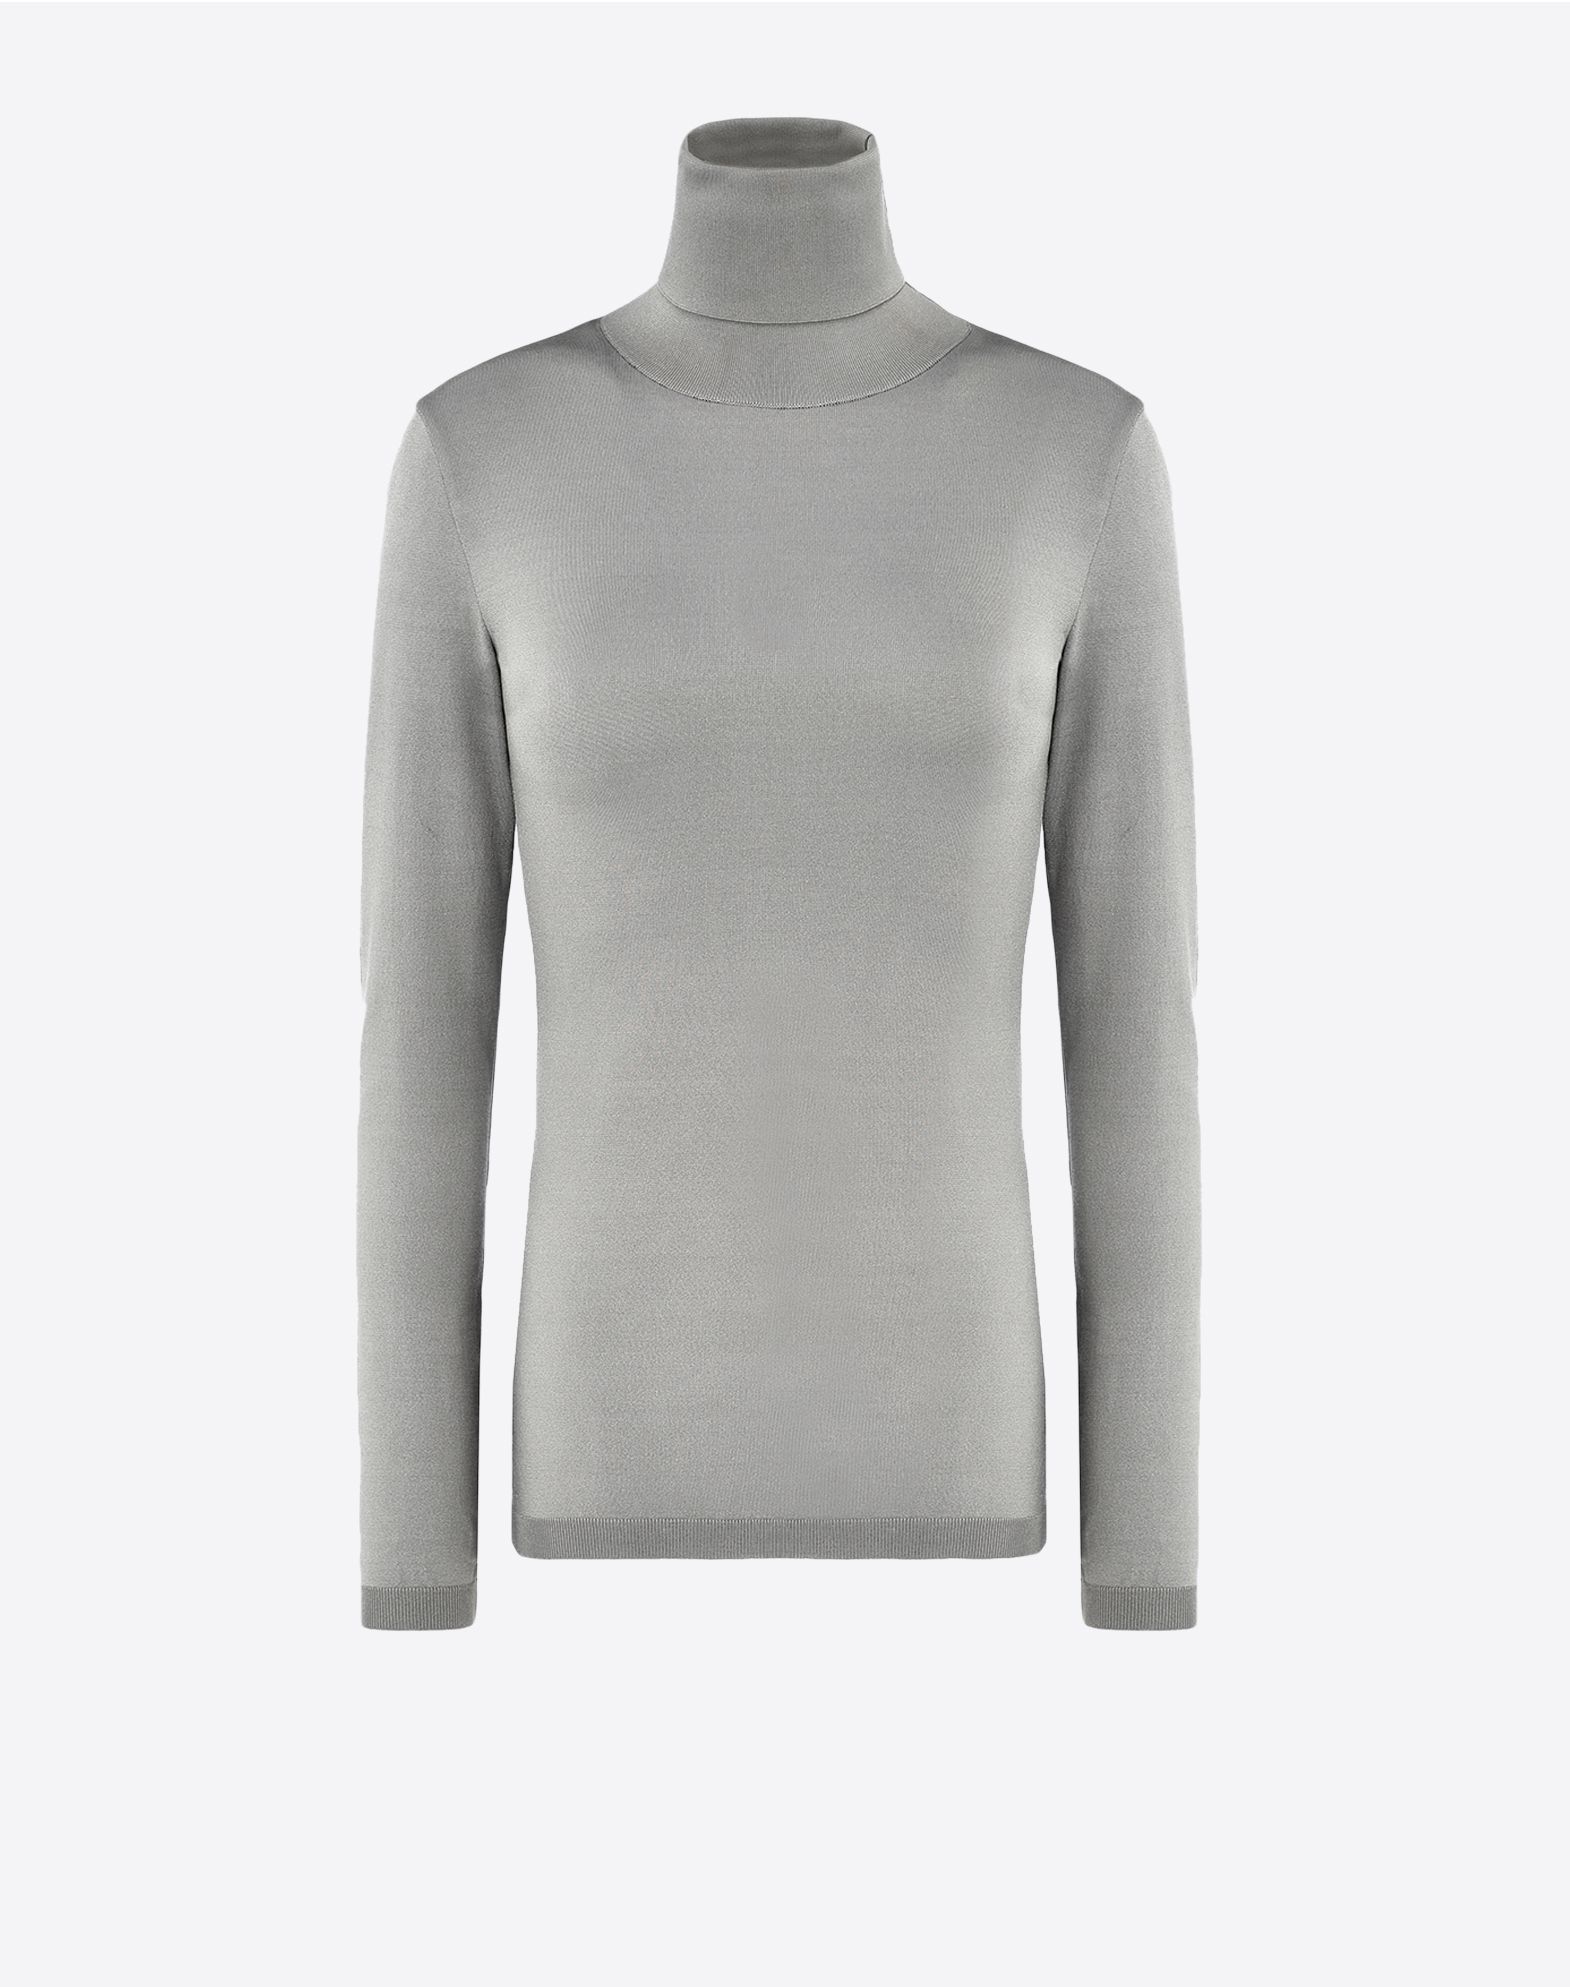 Valentino Long Sleeved Turtleneck, Knit Tops for Women - Valentino ...